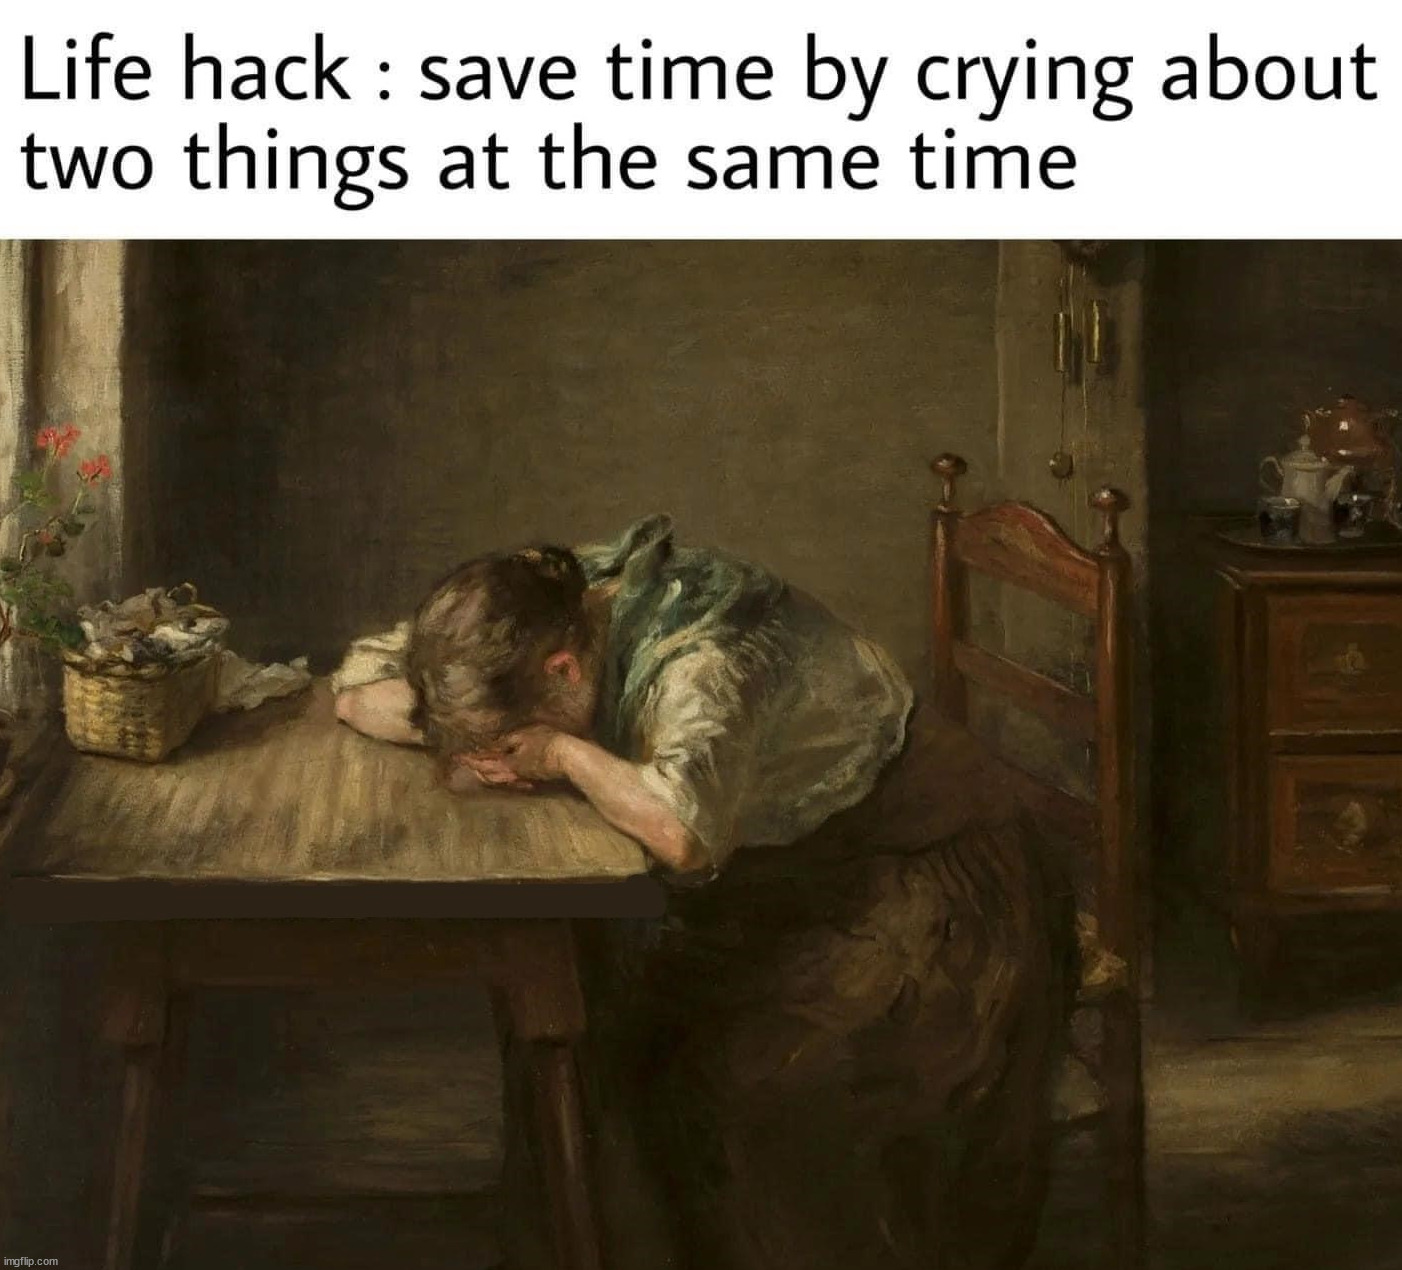 Crying | image tagged in life hack | made w/ Imgflip meme maker